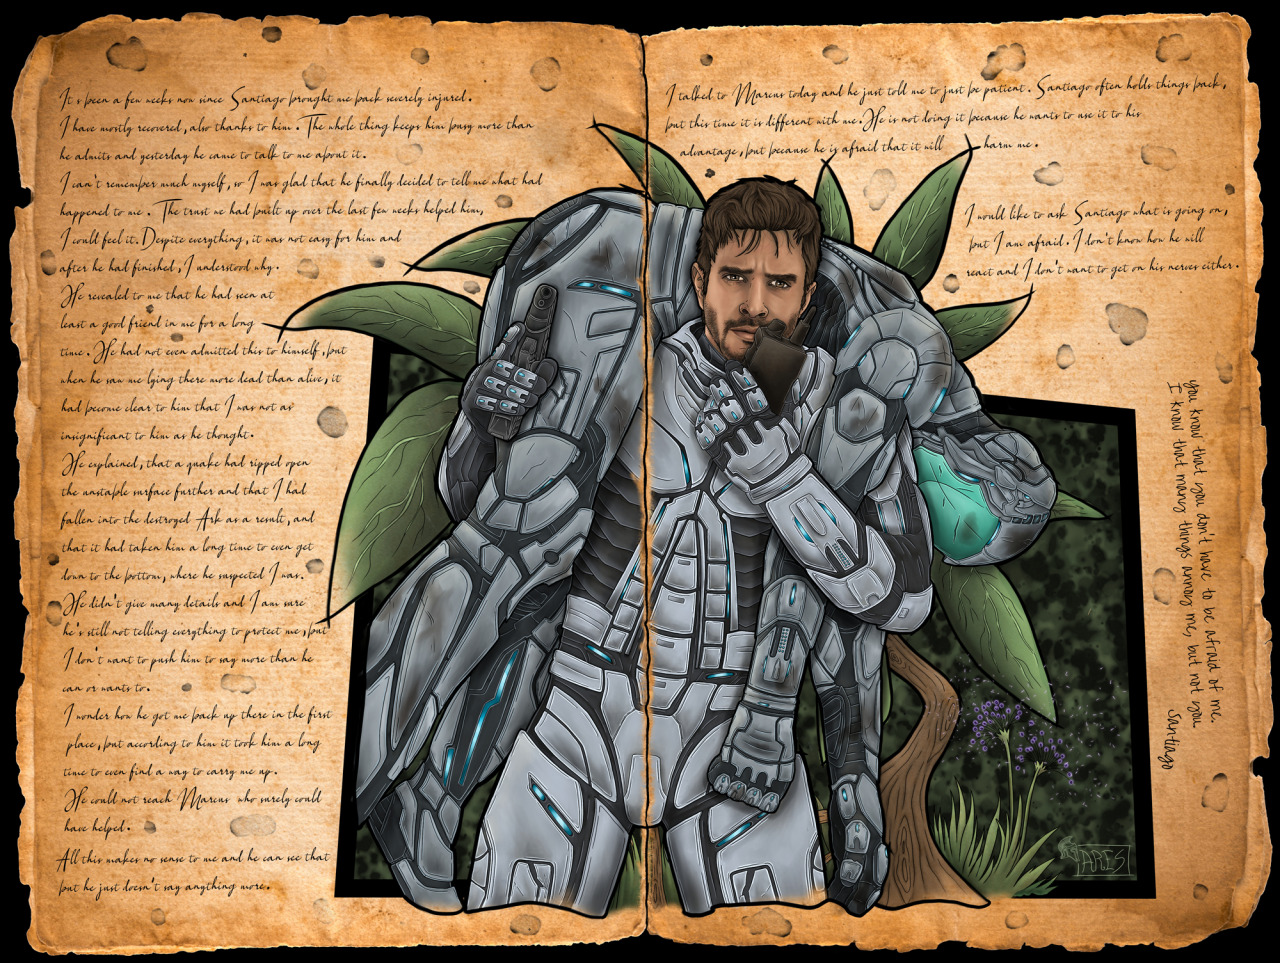 Finished the next journal entry of Jamies journal. This one followes directly the Reunion entry and will have another follow up where more will be revealed.
Jamies Journal Reunion: www.deviantart.com/vahilor/art… #Ark Survival Evolved #human#man#male#Jamie#Santiago#Tek#Tek Armor#art#drawing#digital#journal#playark